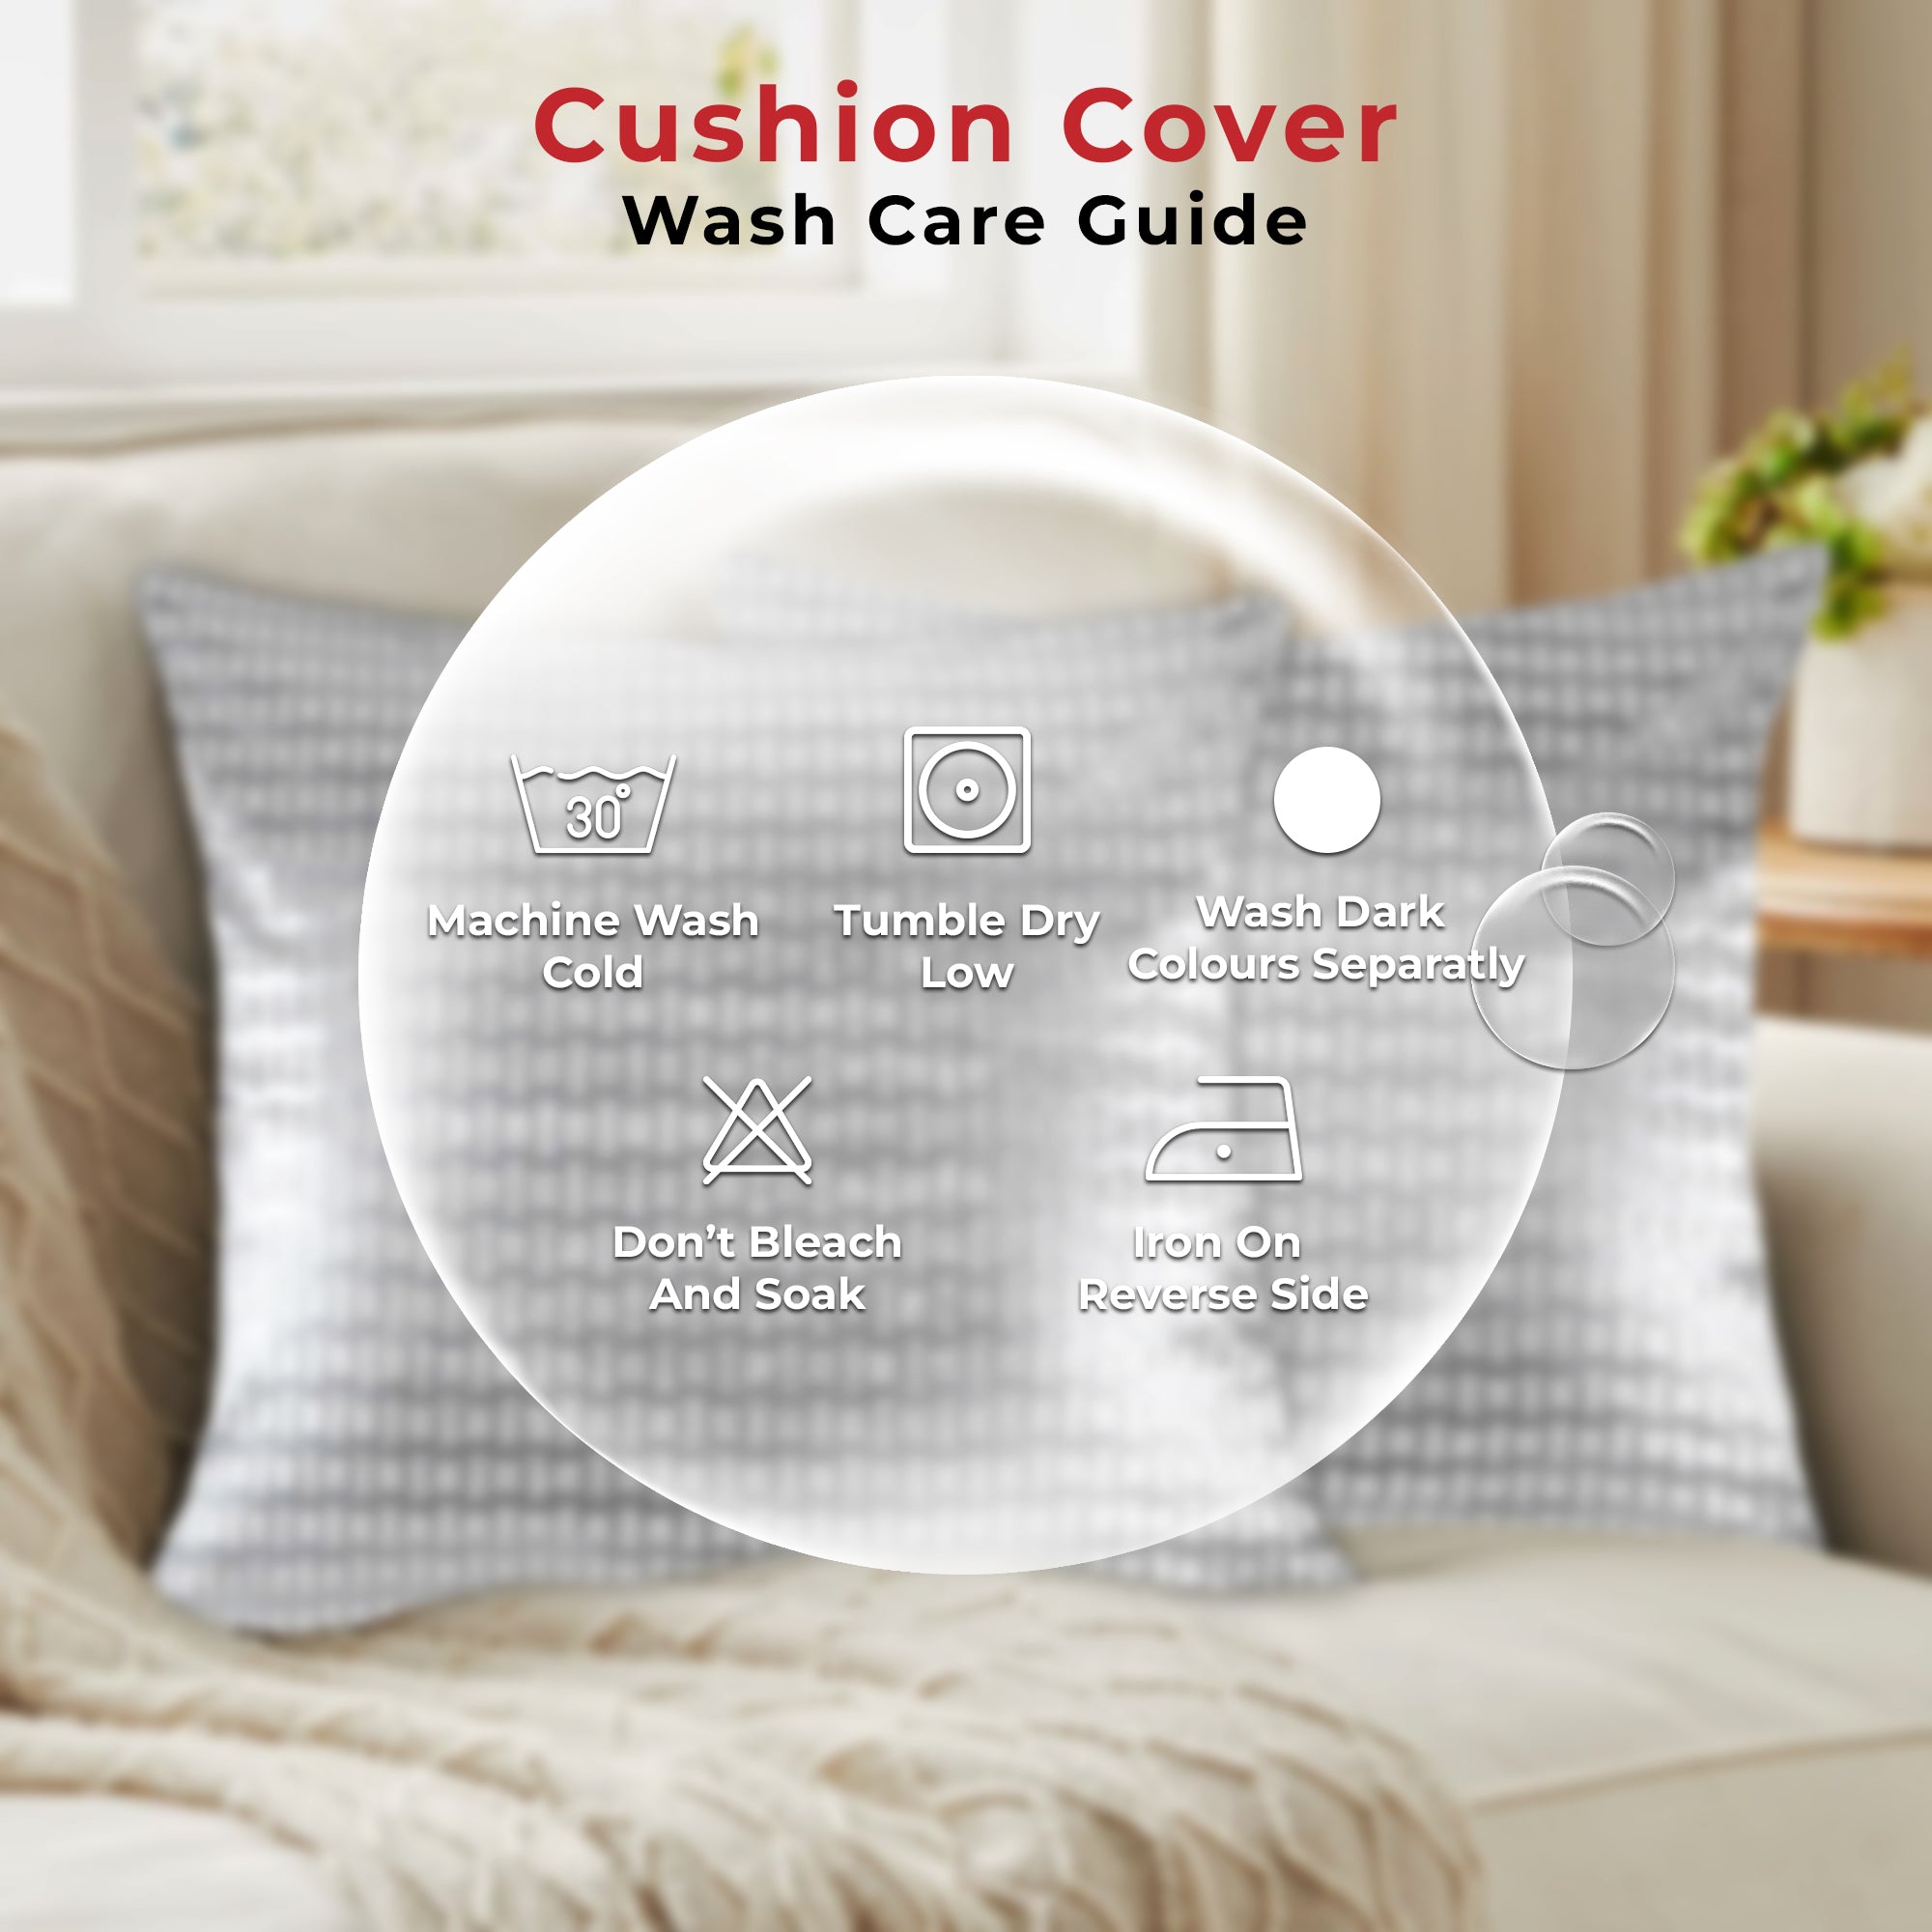 Tesmare Luxury Style Cushion Cover Super Soft Pillowcases set of 2, 12 x 20 inch, White/Silver